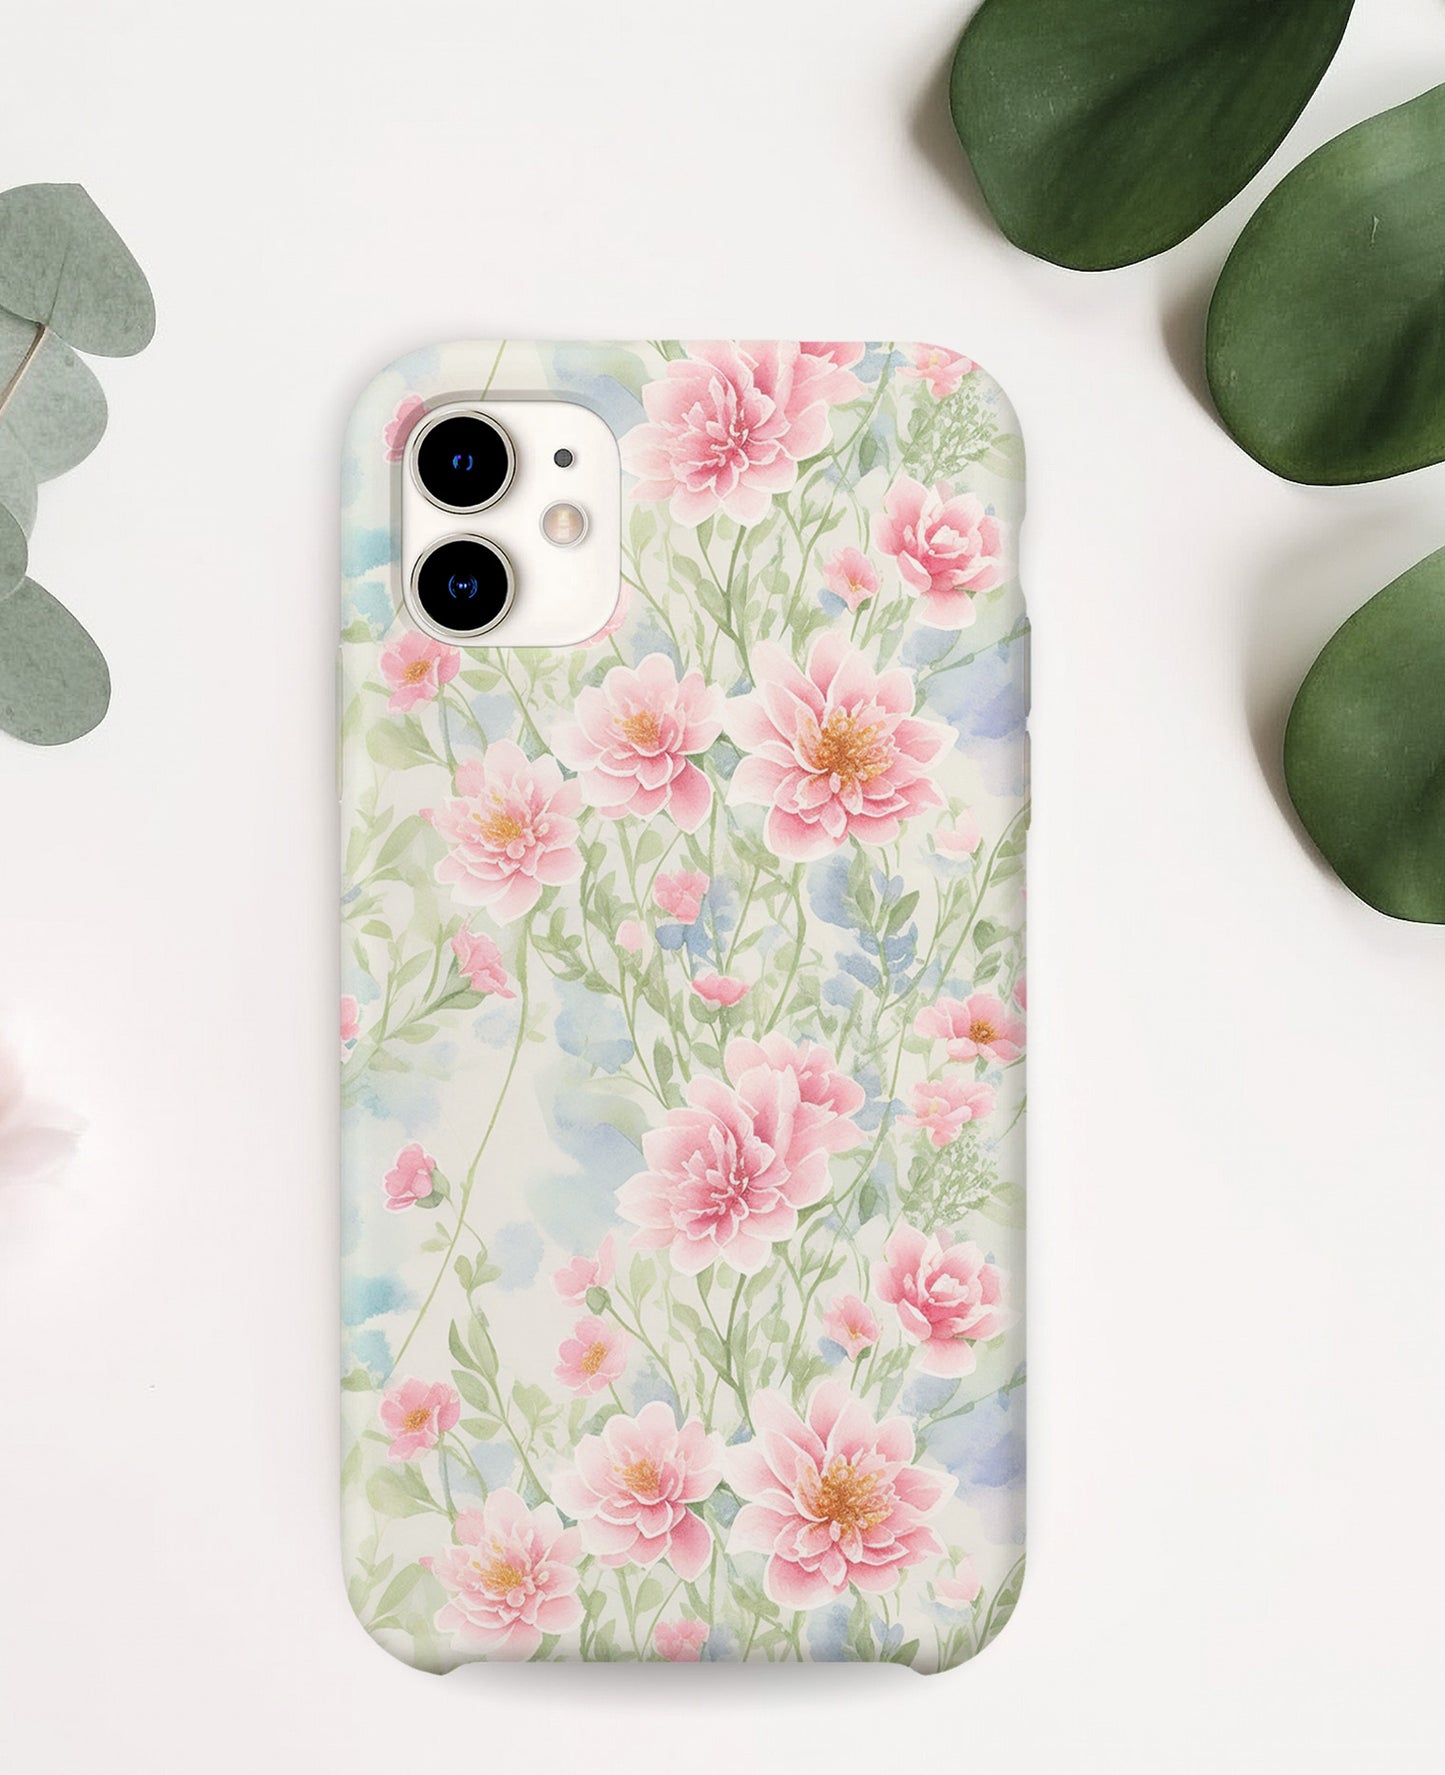 Phone Cases for iPhone, Samsung Galaxy & Google Pixel - Cheerful Lane